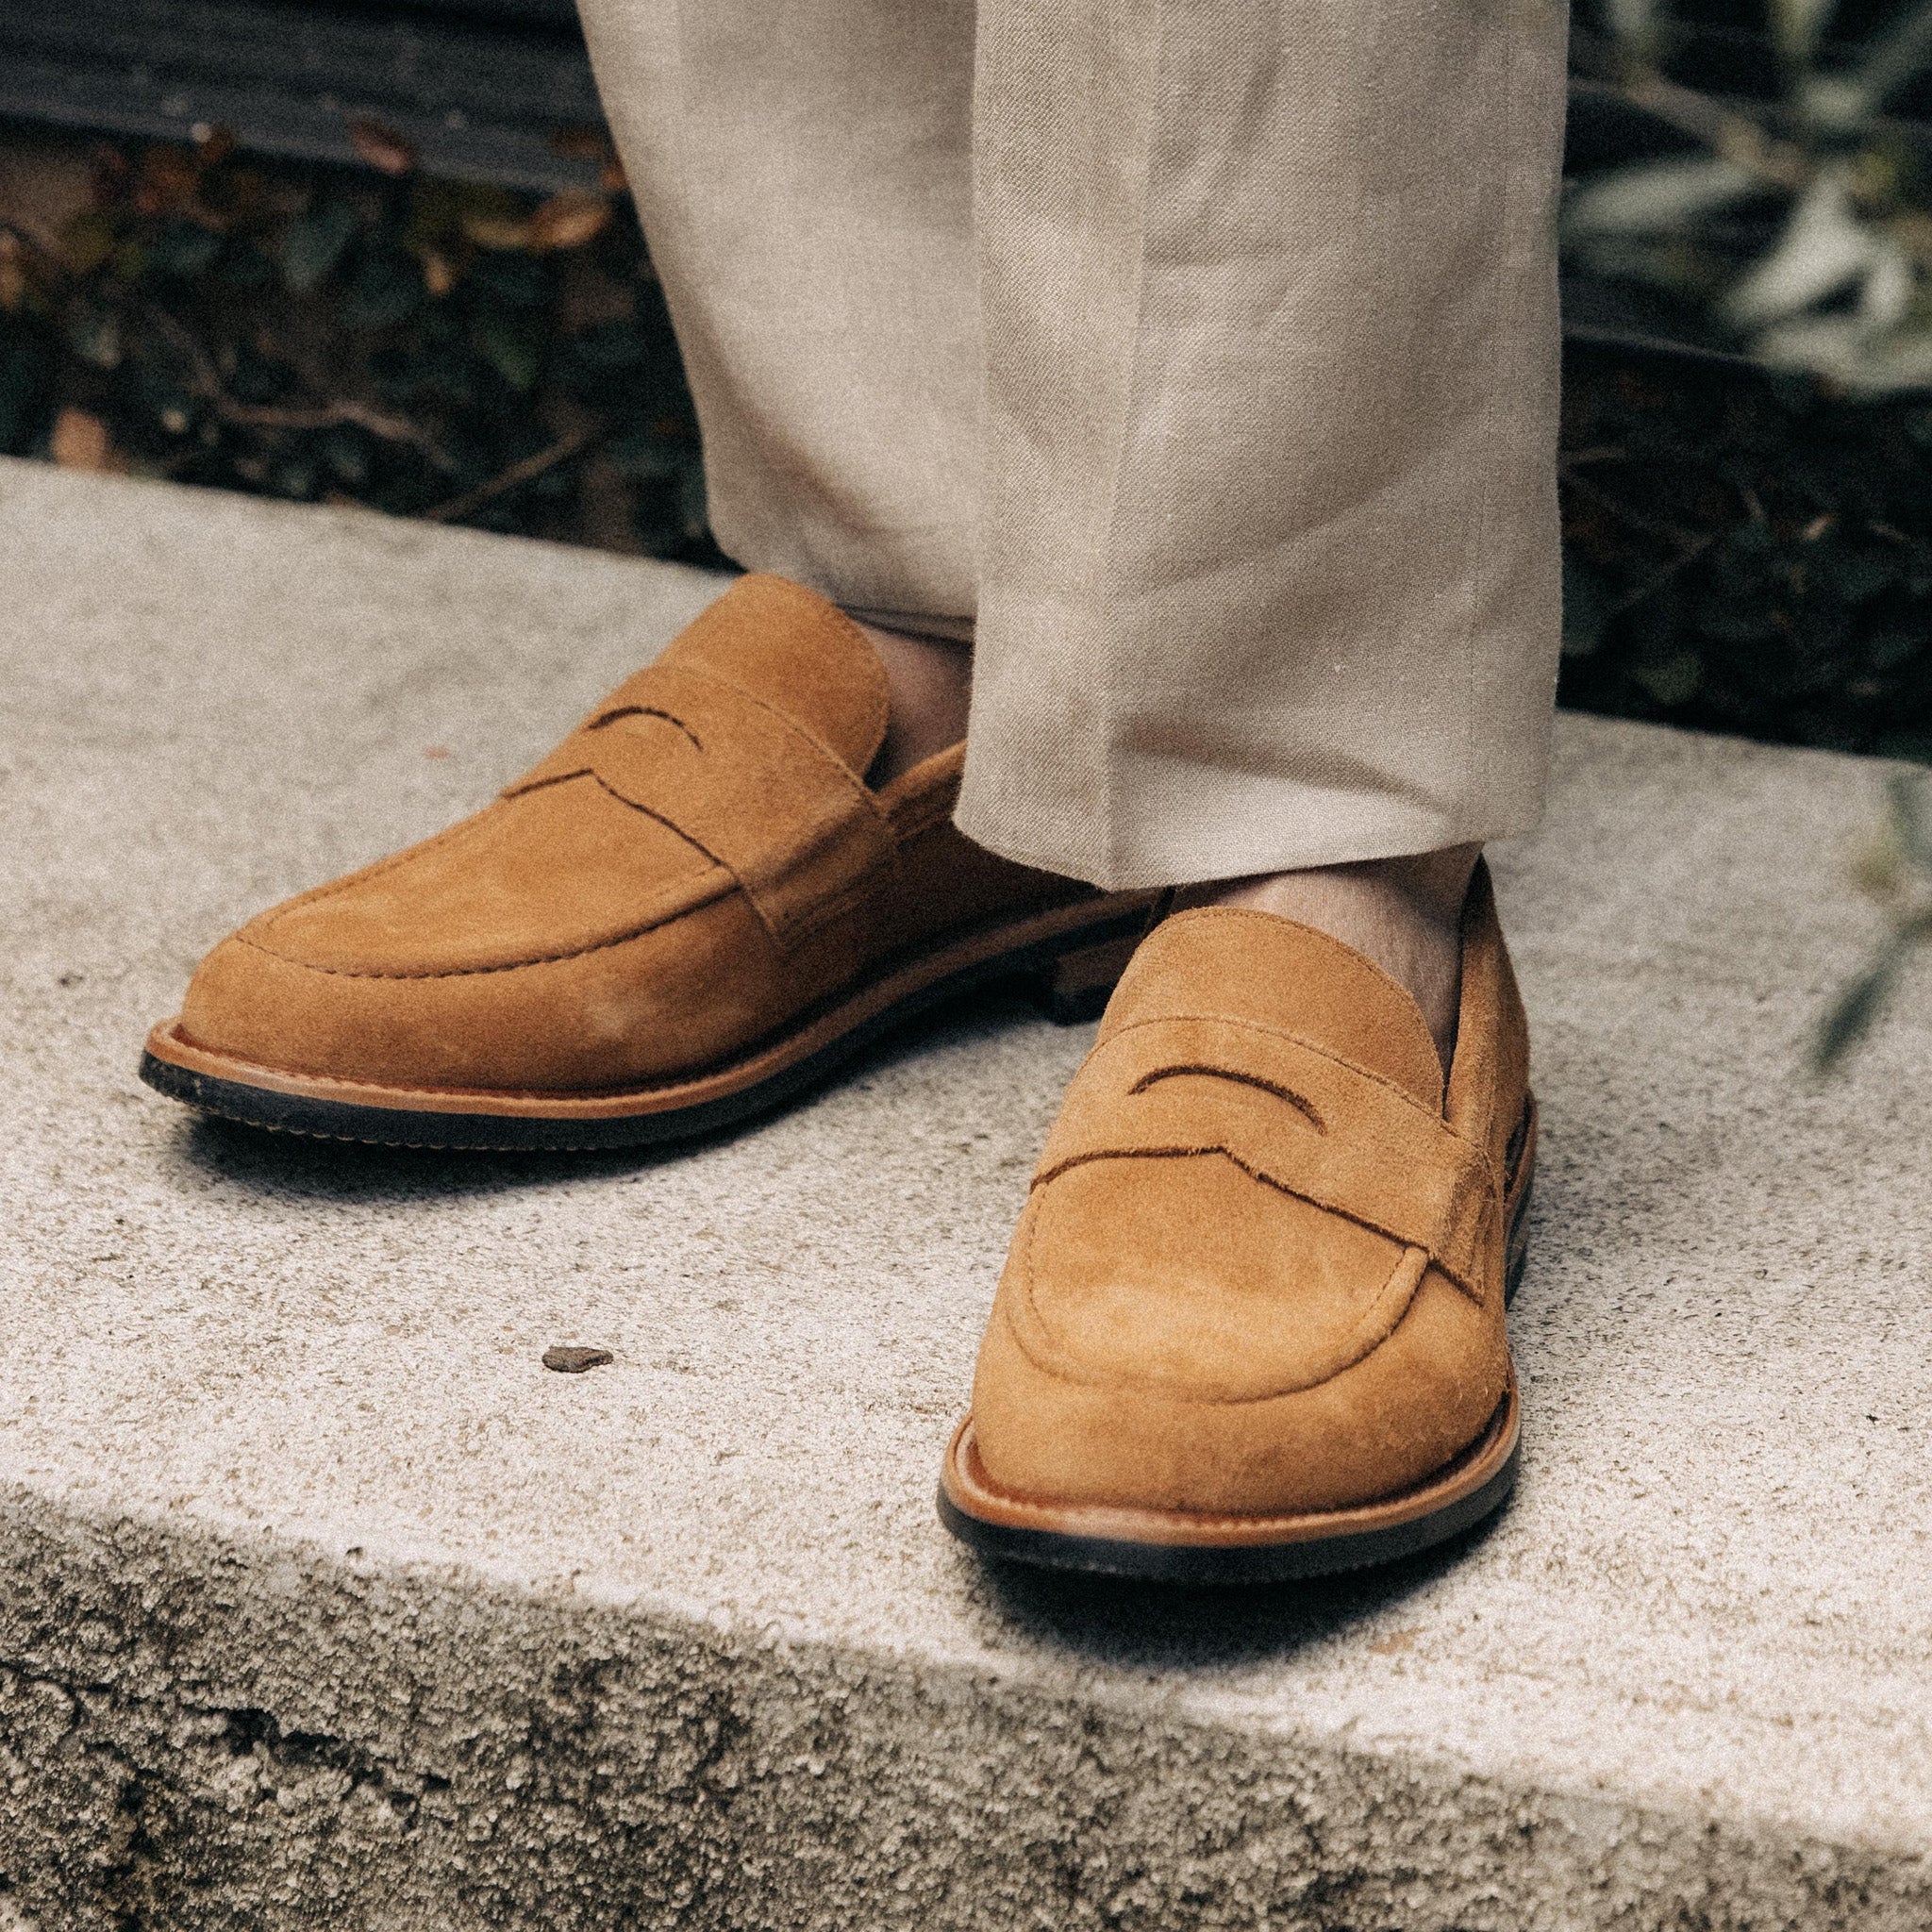 The Loafer in Tan Suede